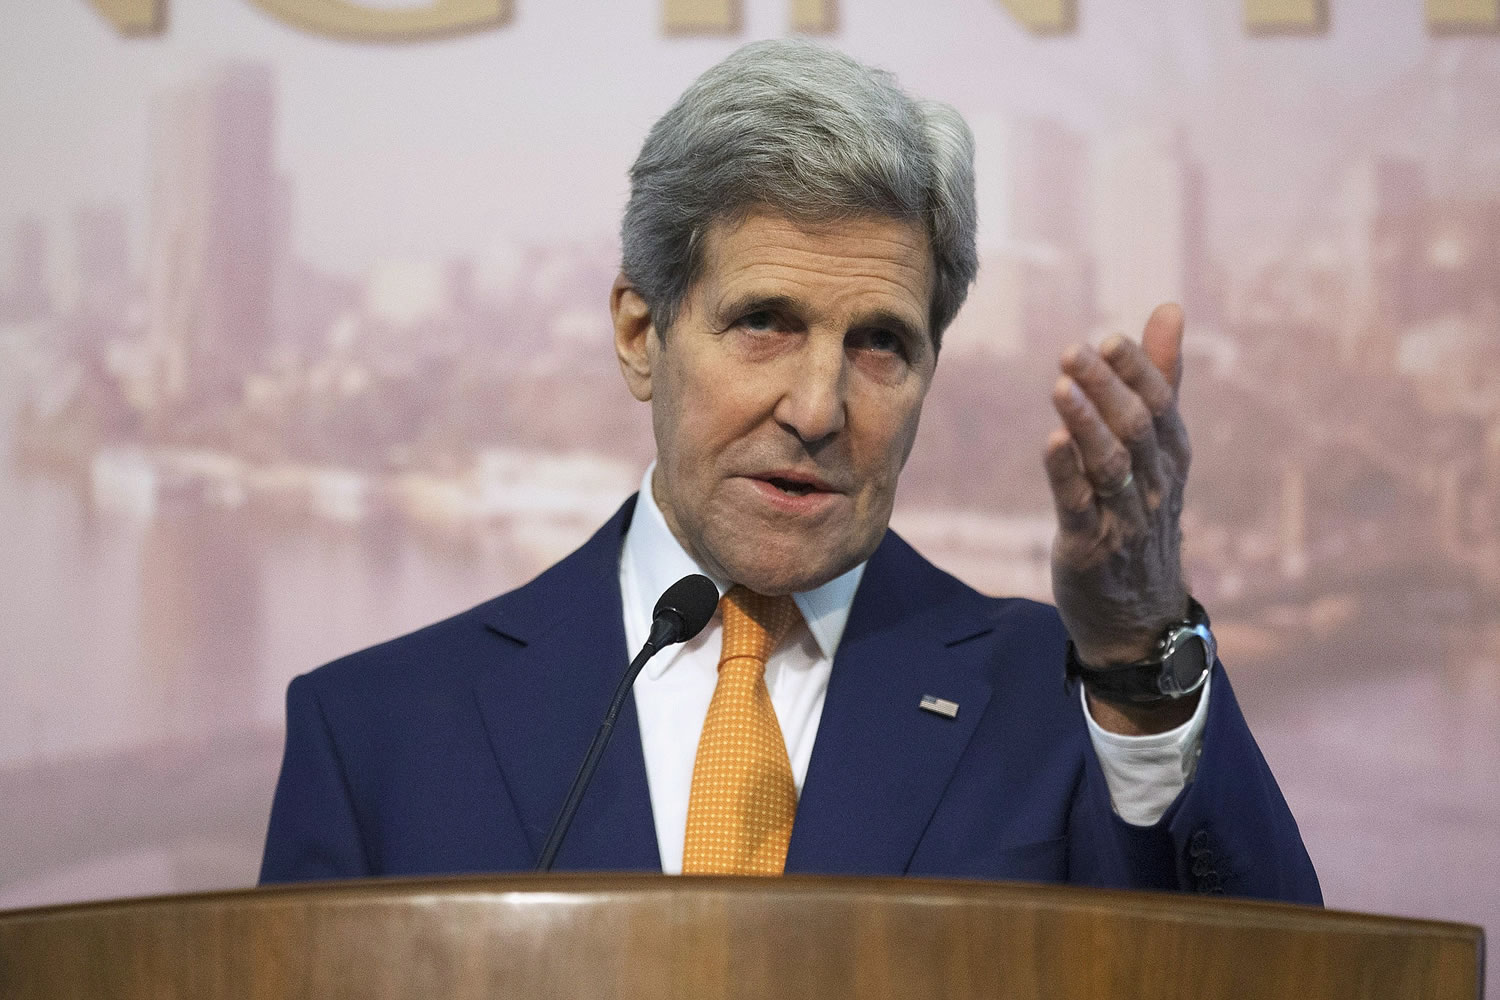 &quot;We have to negotiate in the end.&quot;
John Kerry
U.S. secretary of state, about ending the Syrian civil war